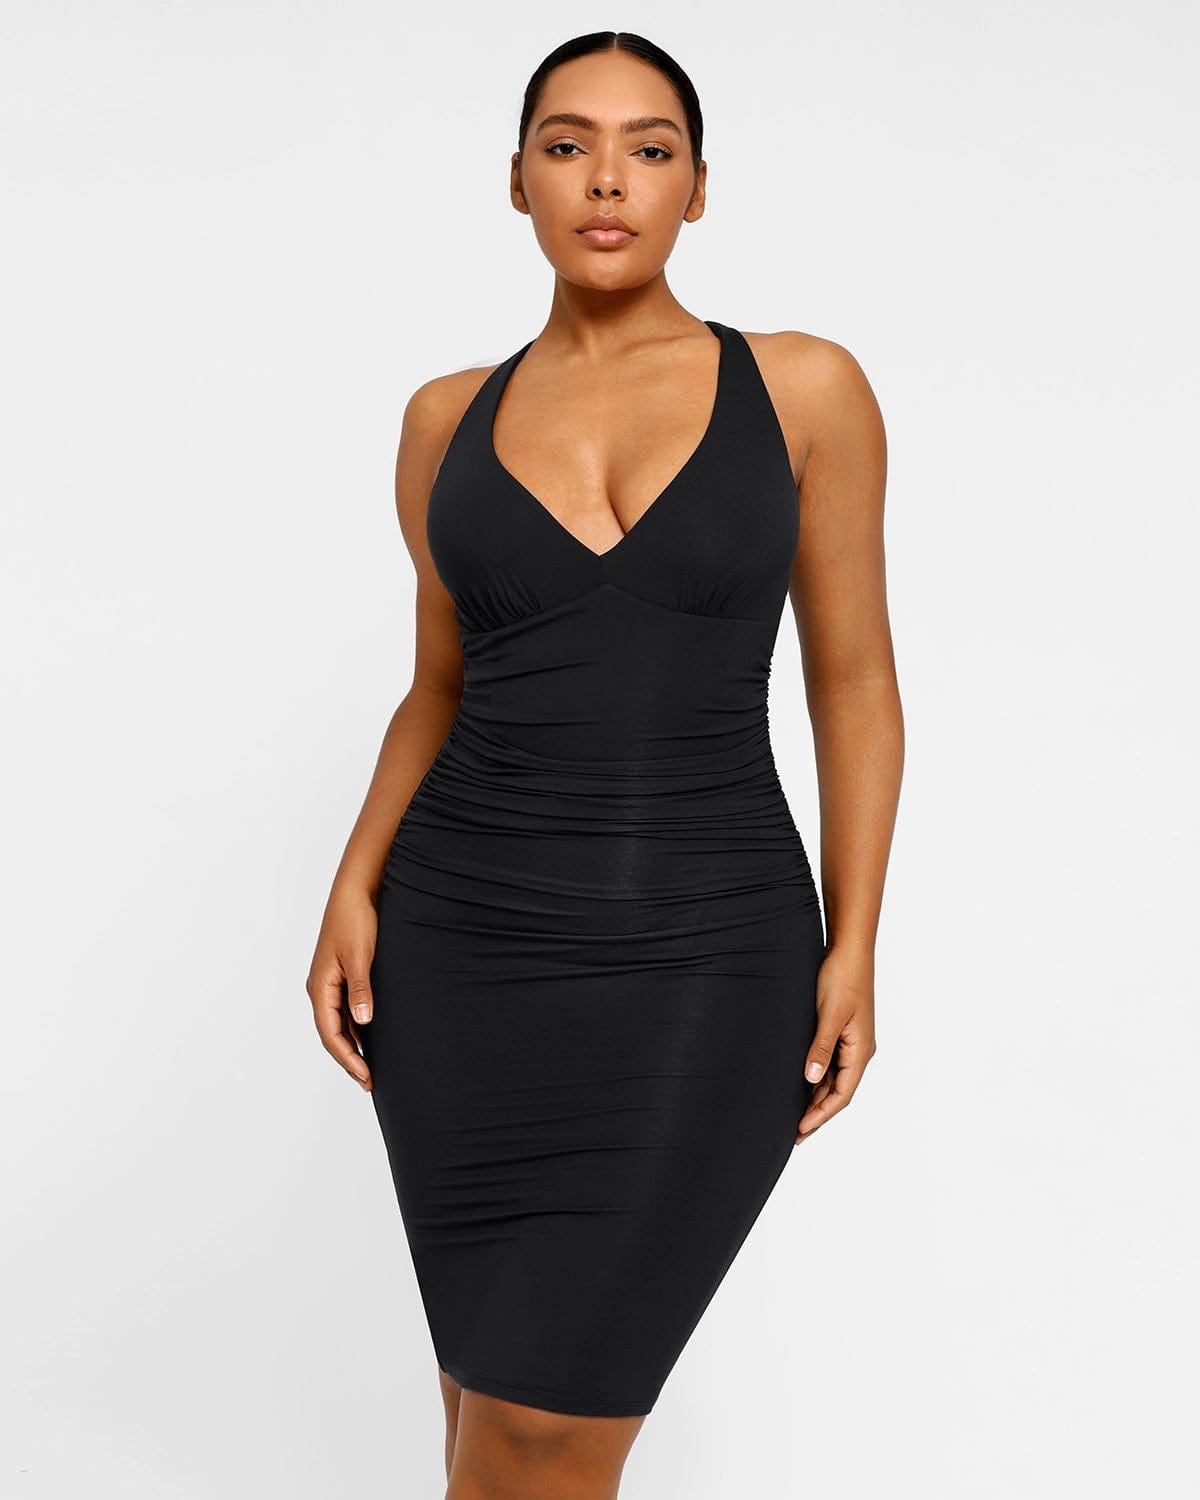 Maxi Dress but make it a Body Shaper from @shopshapellx CODE